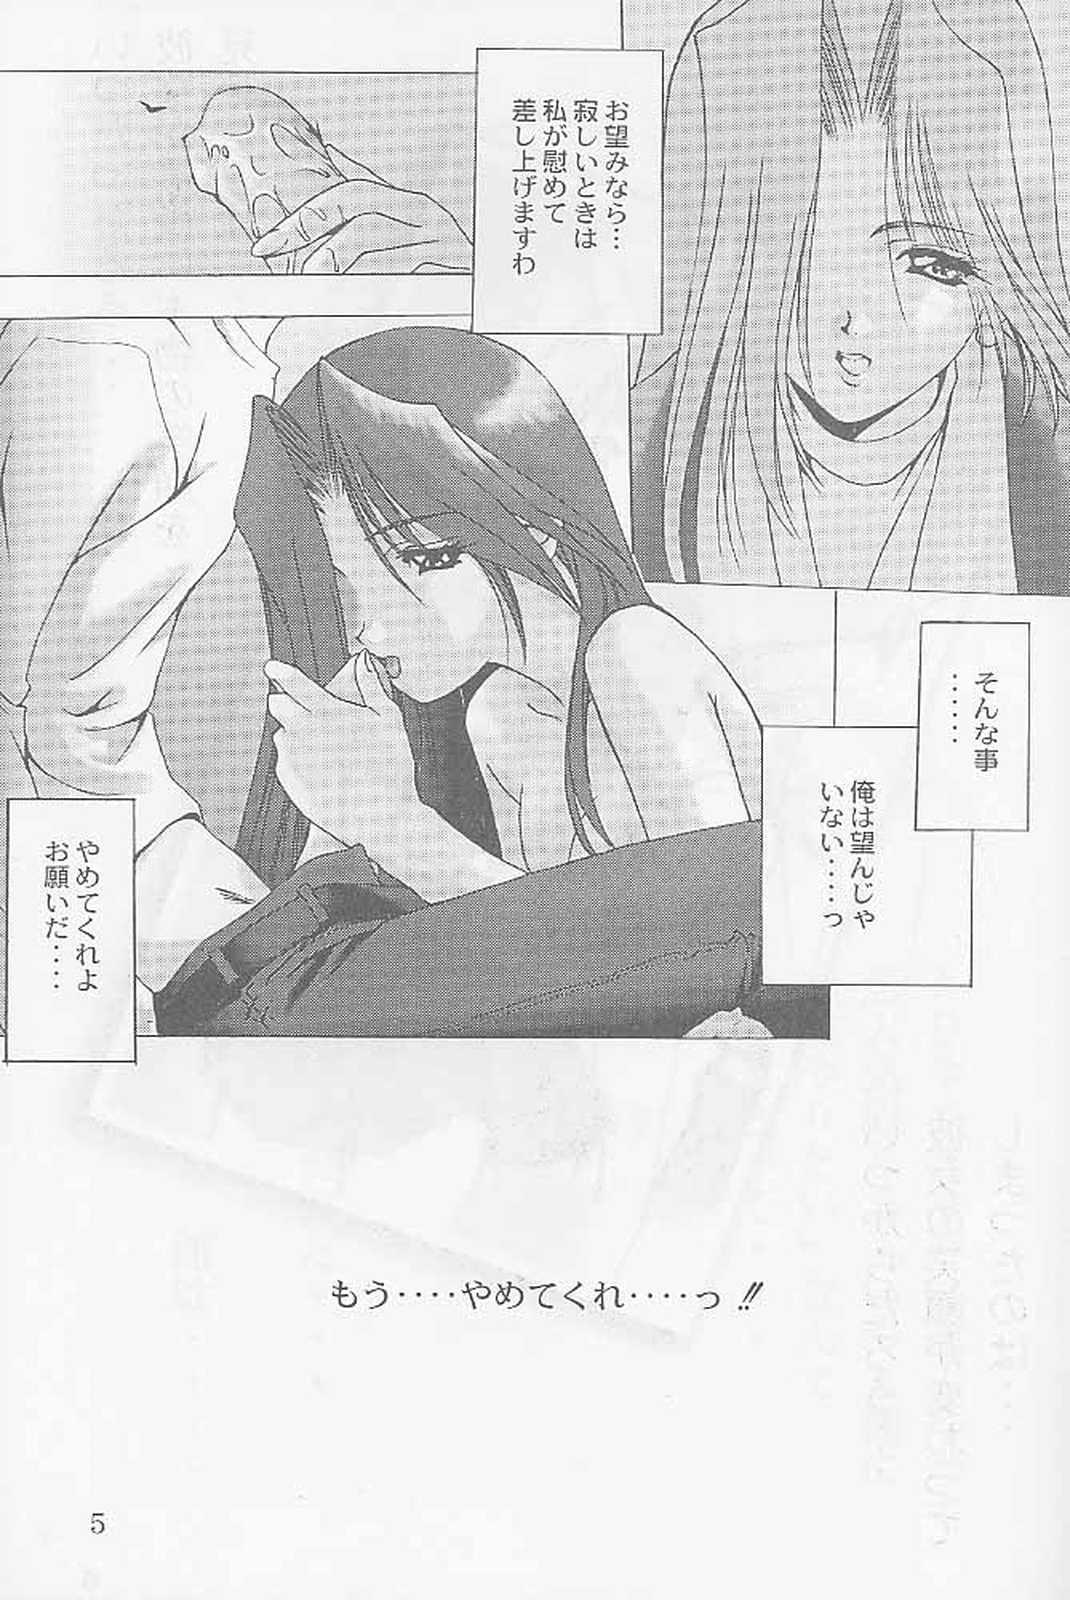 Transsexual First Single ～Christmas night angel～ - White album Wet - Page 4